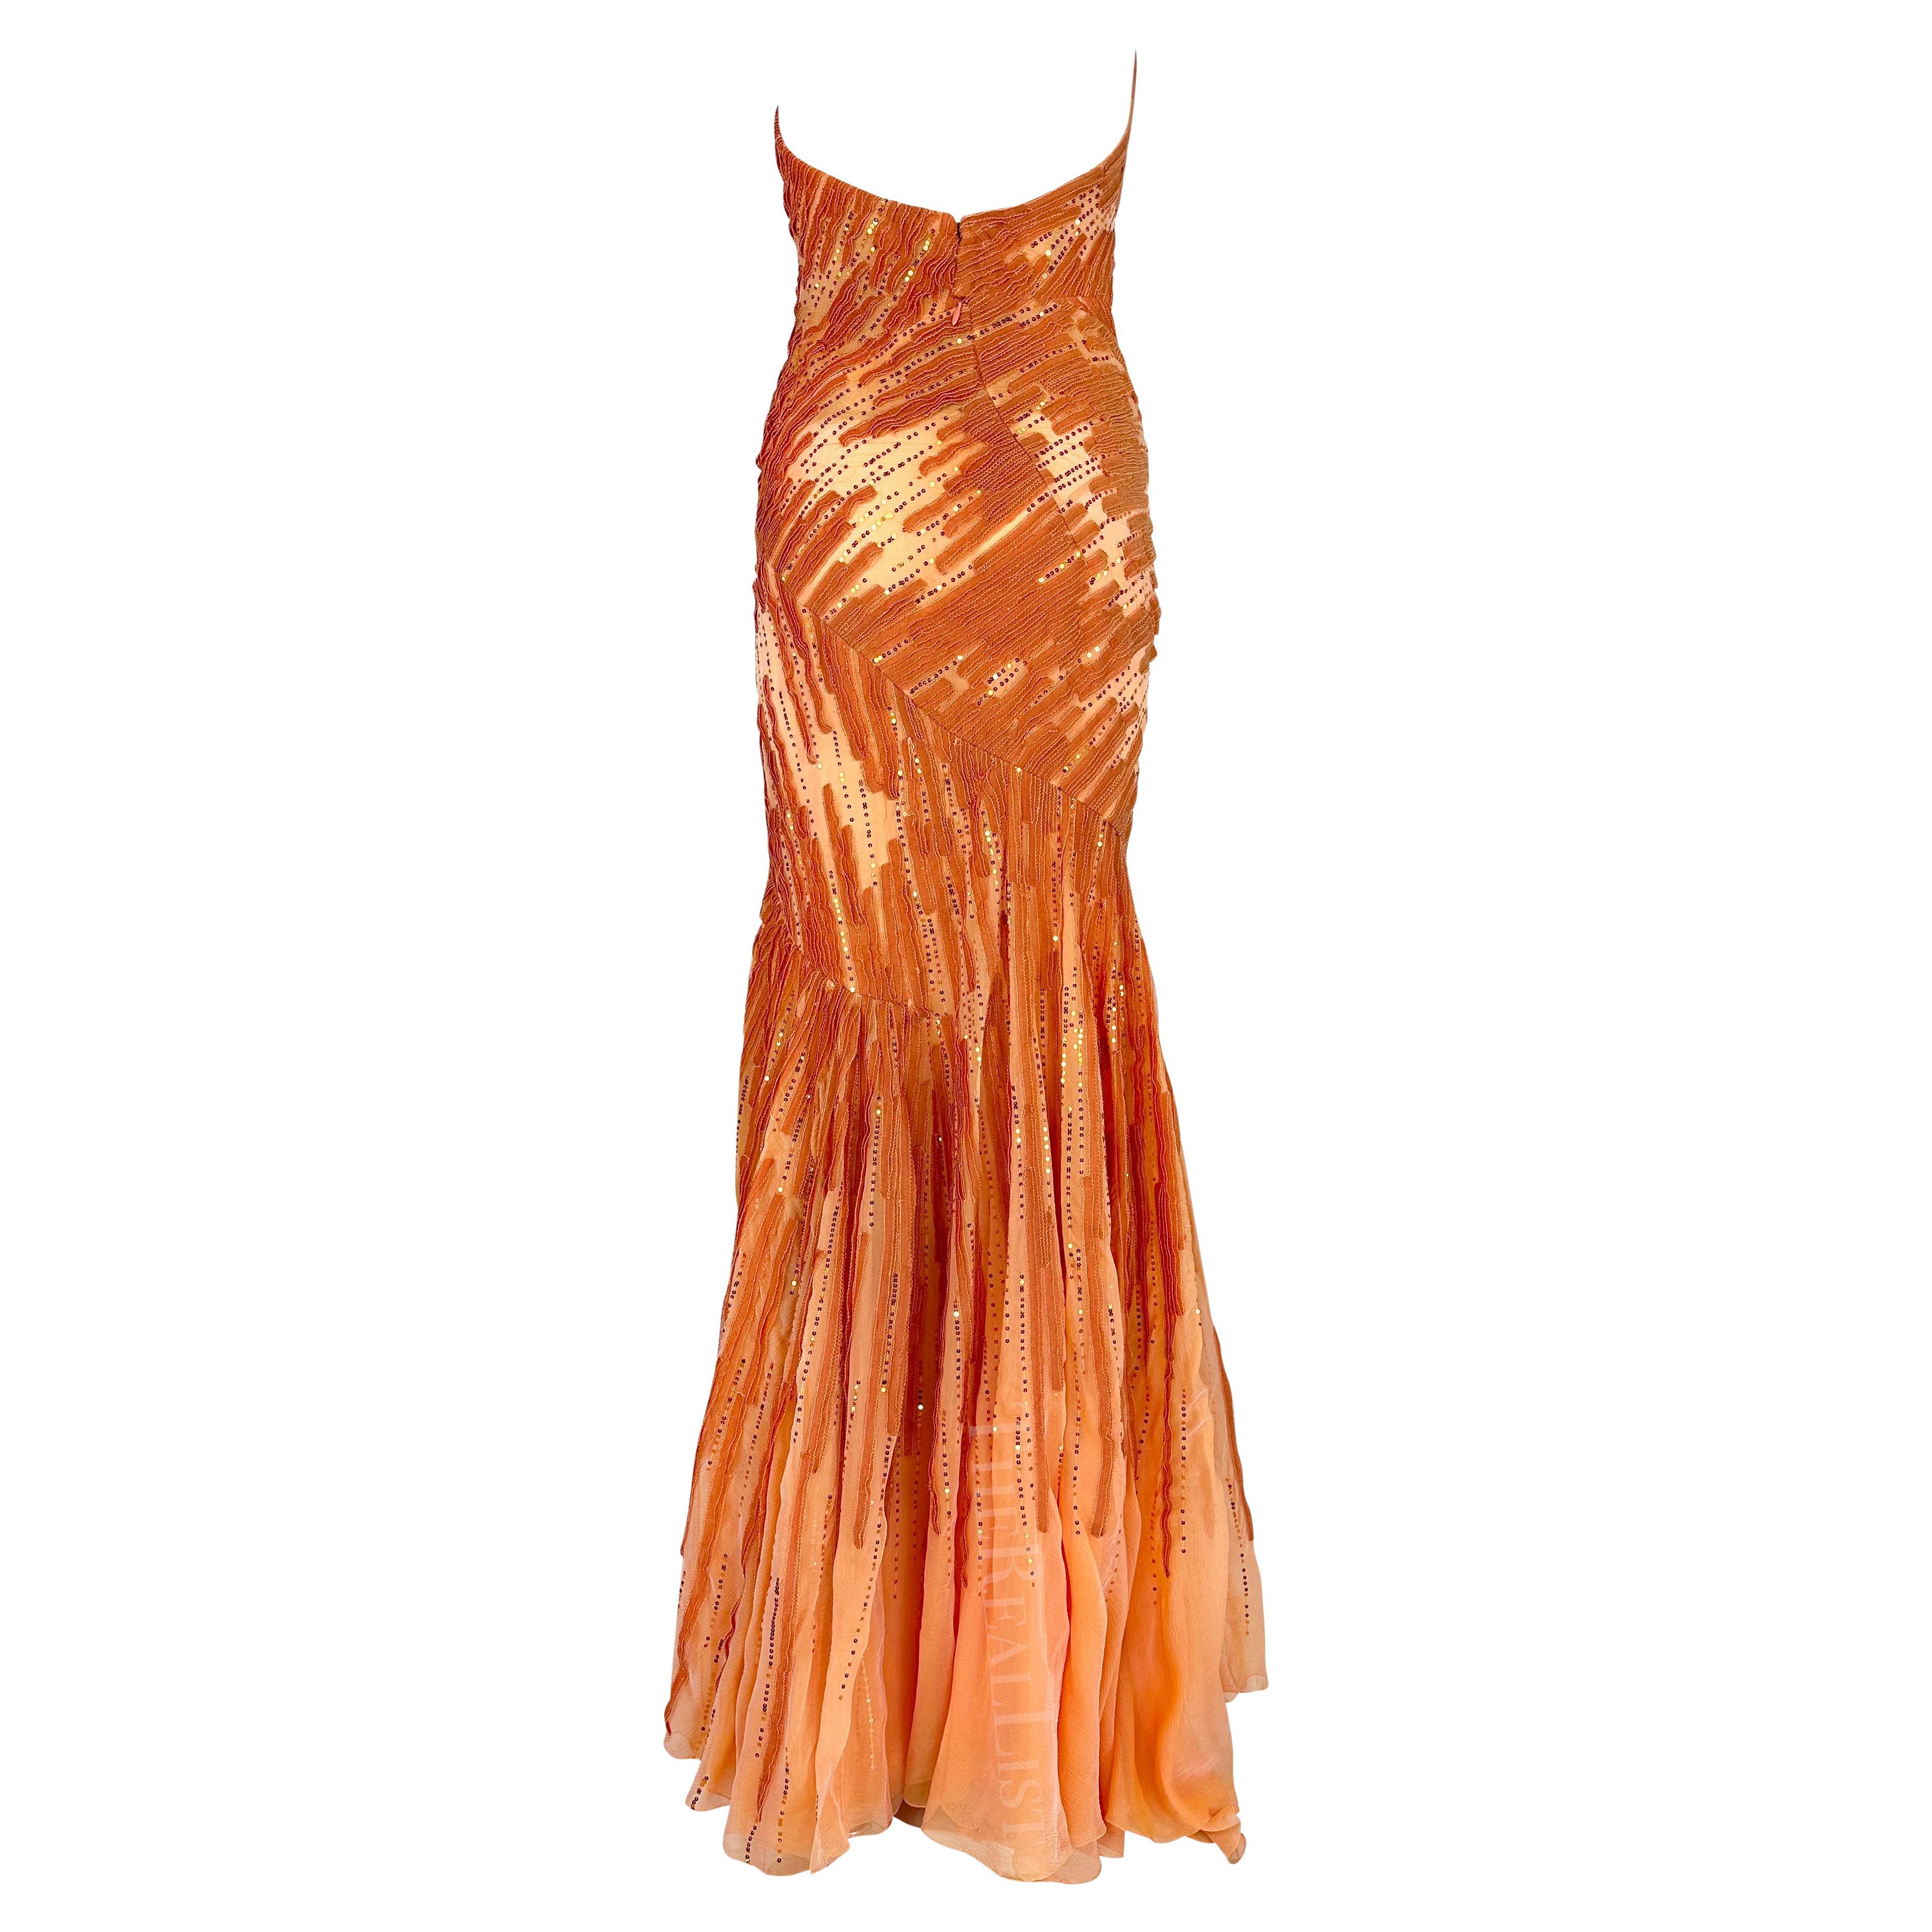 F/W 2002 Atelier Versace by Donatella Maya Rudolph Sheer Orange Sequin Gown For Sale 8